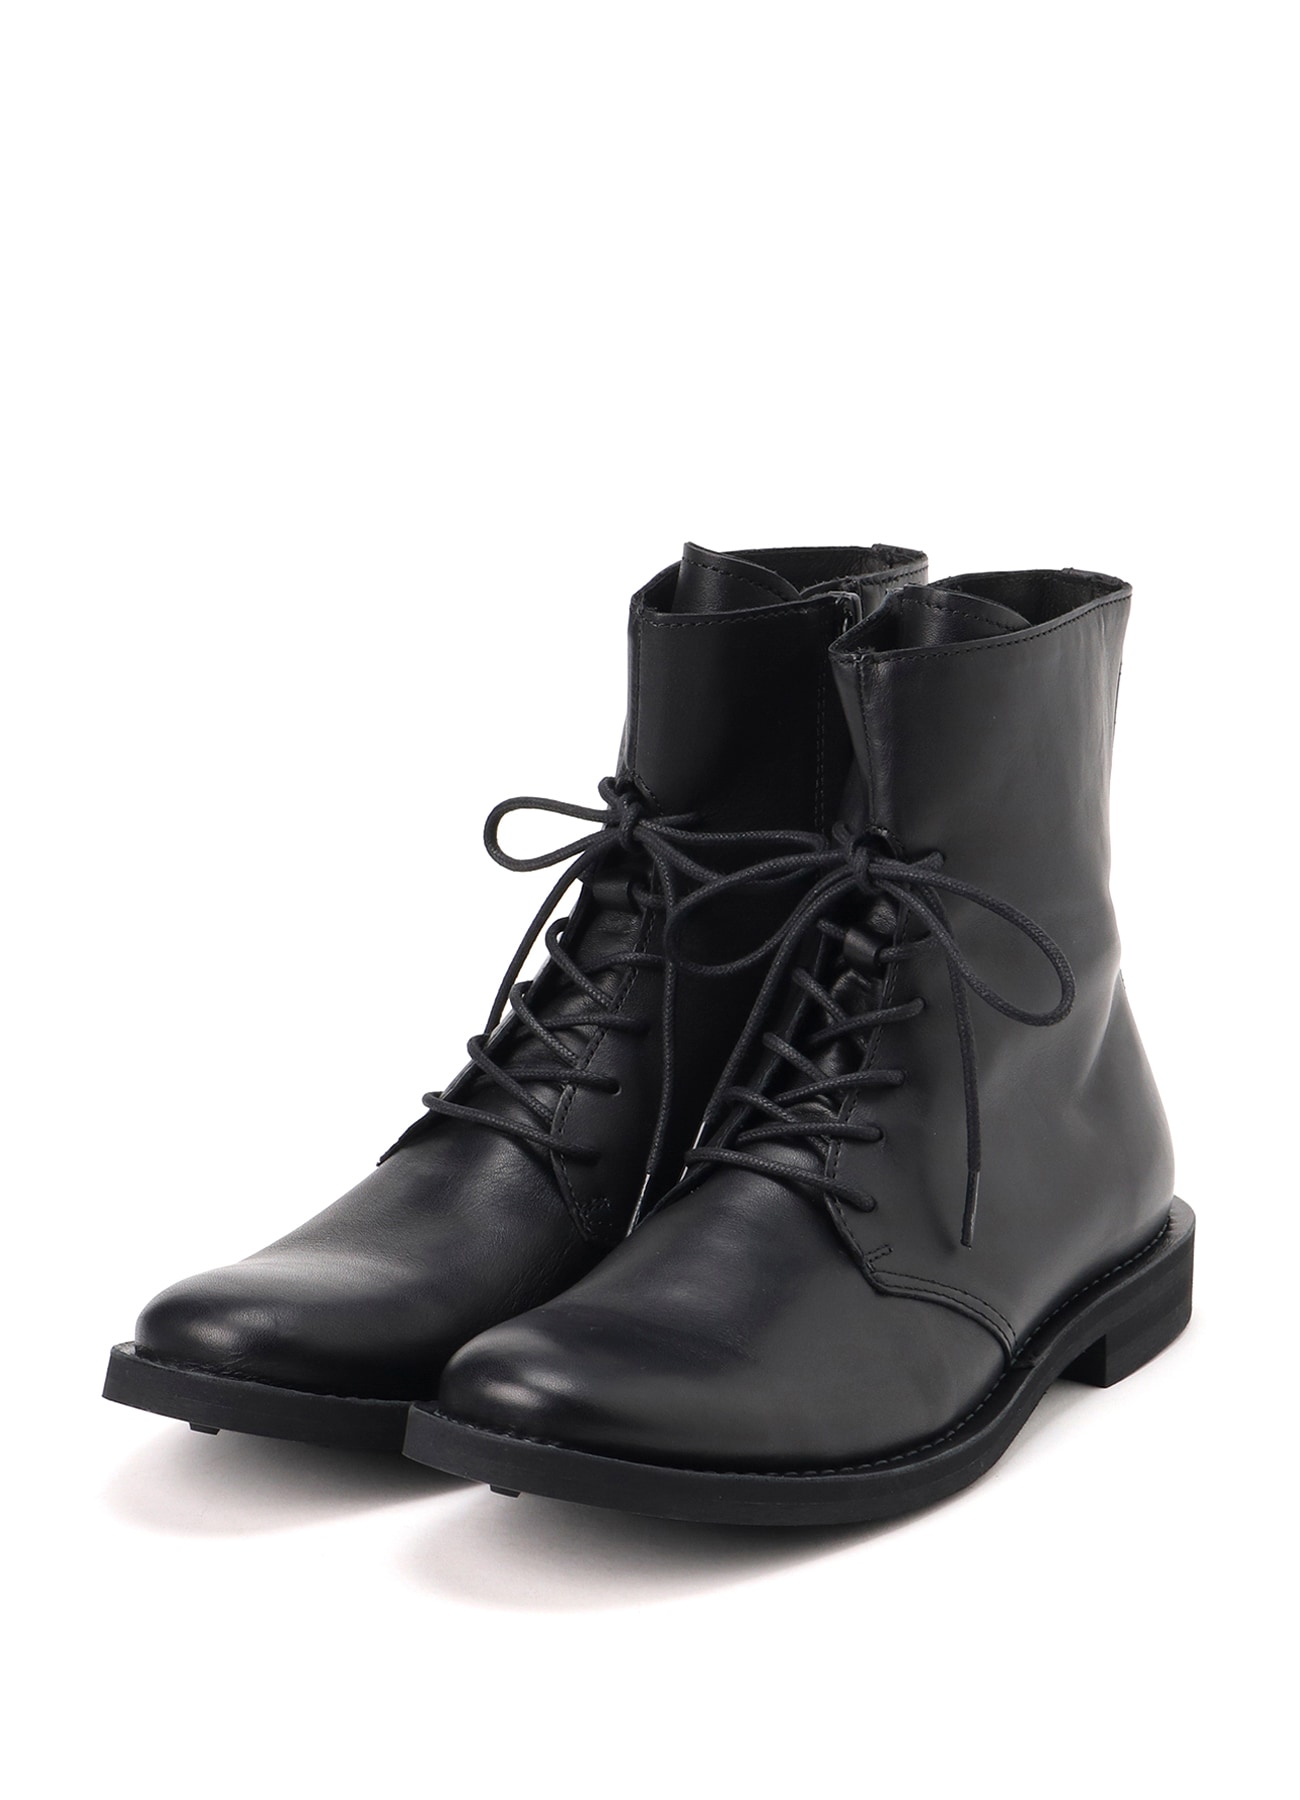 SOFT OIL LEATHER BOOTS WITH LACE UP ZIPPER